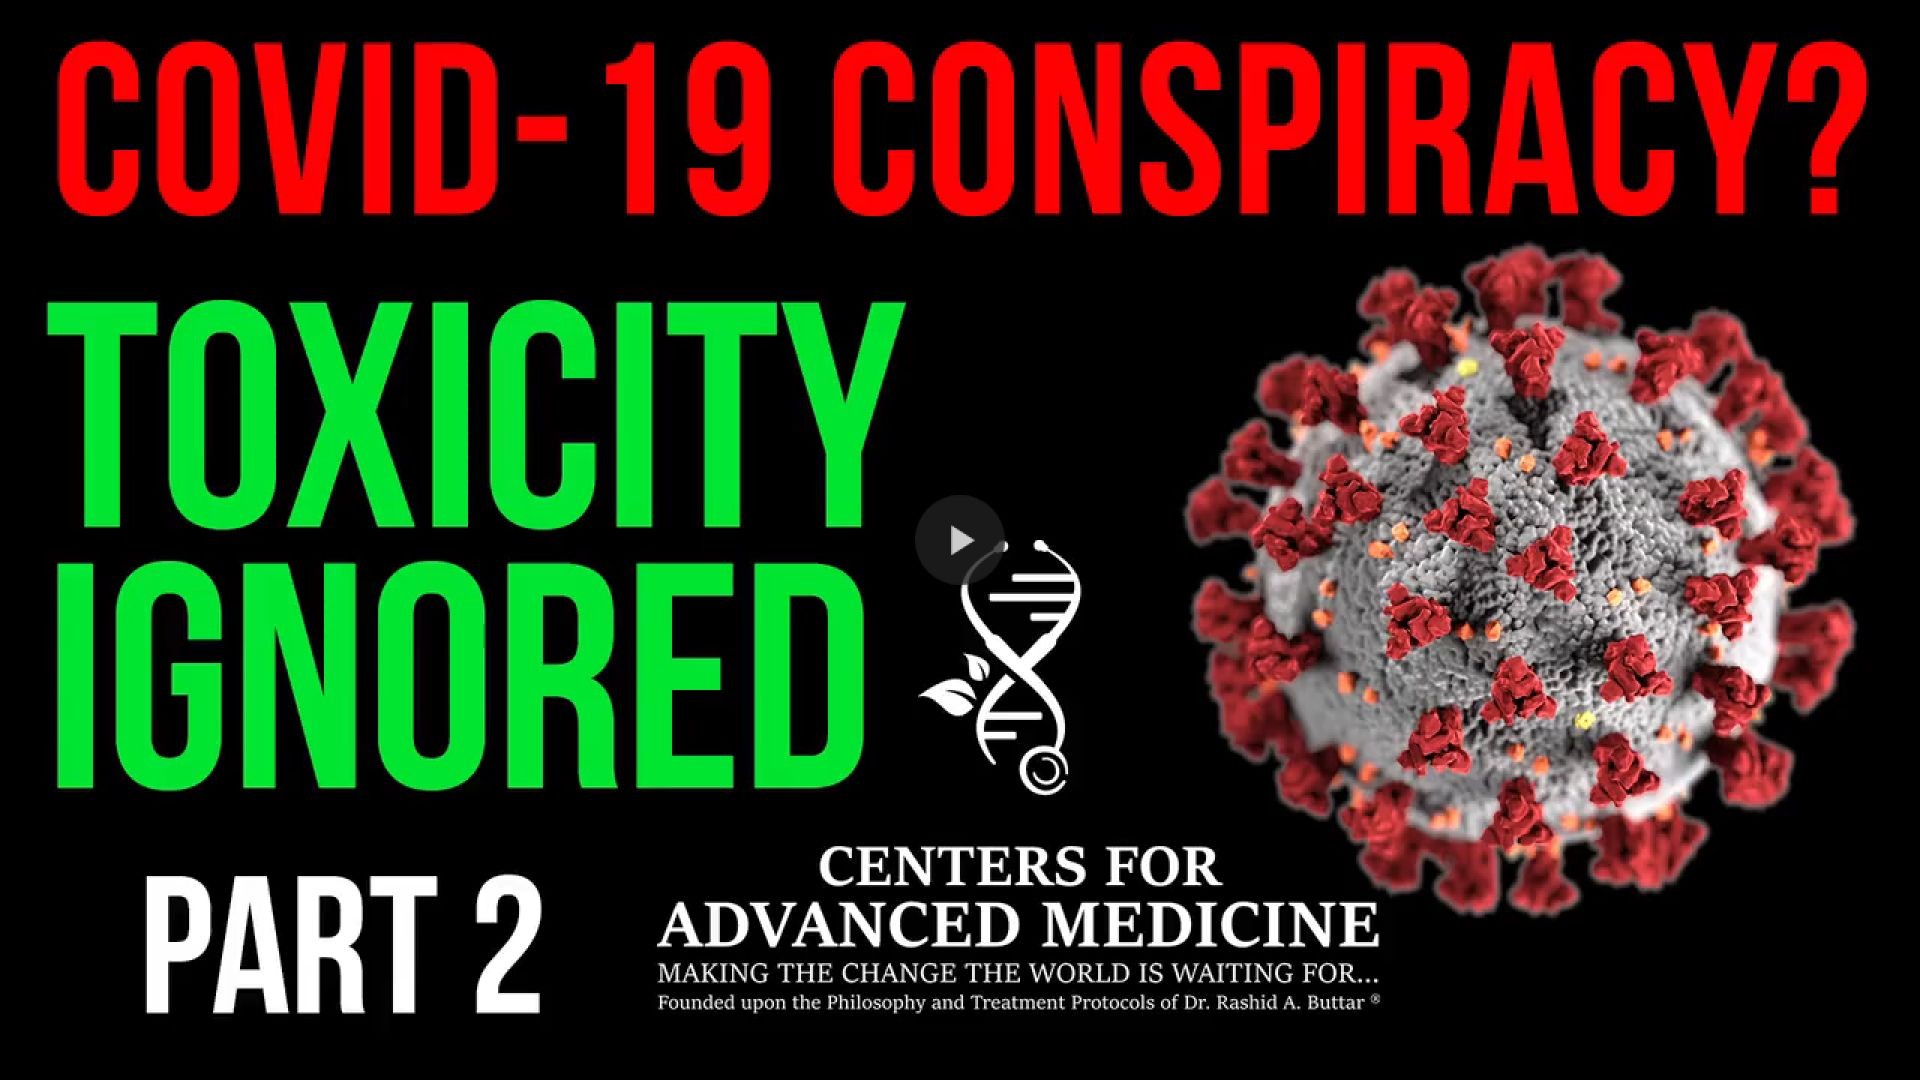 COVID-19 Conspiracy? - Video 2 = Dr. Buttar